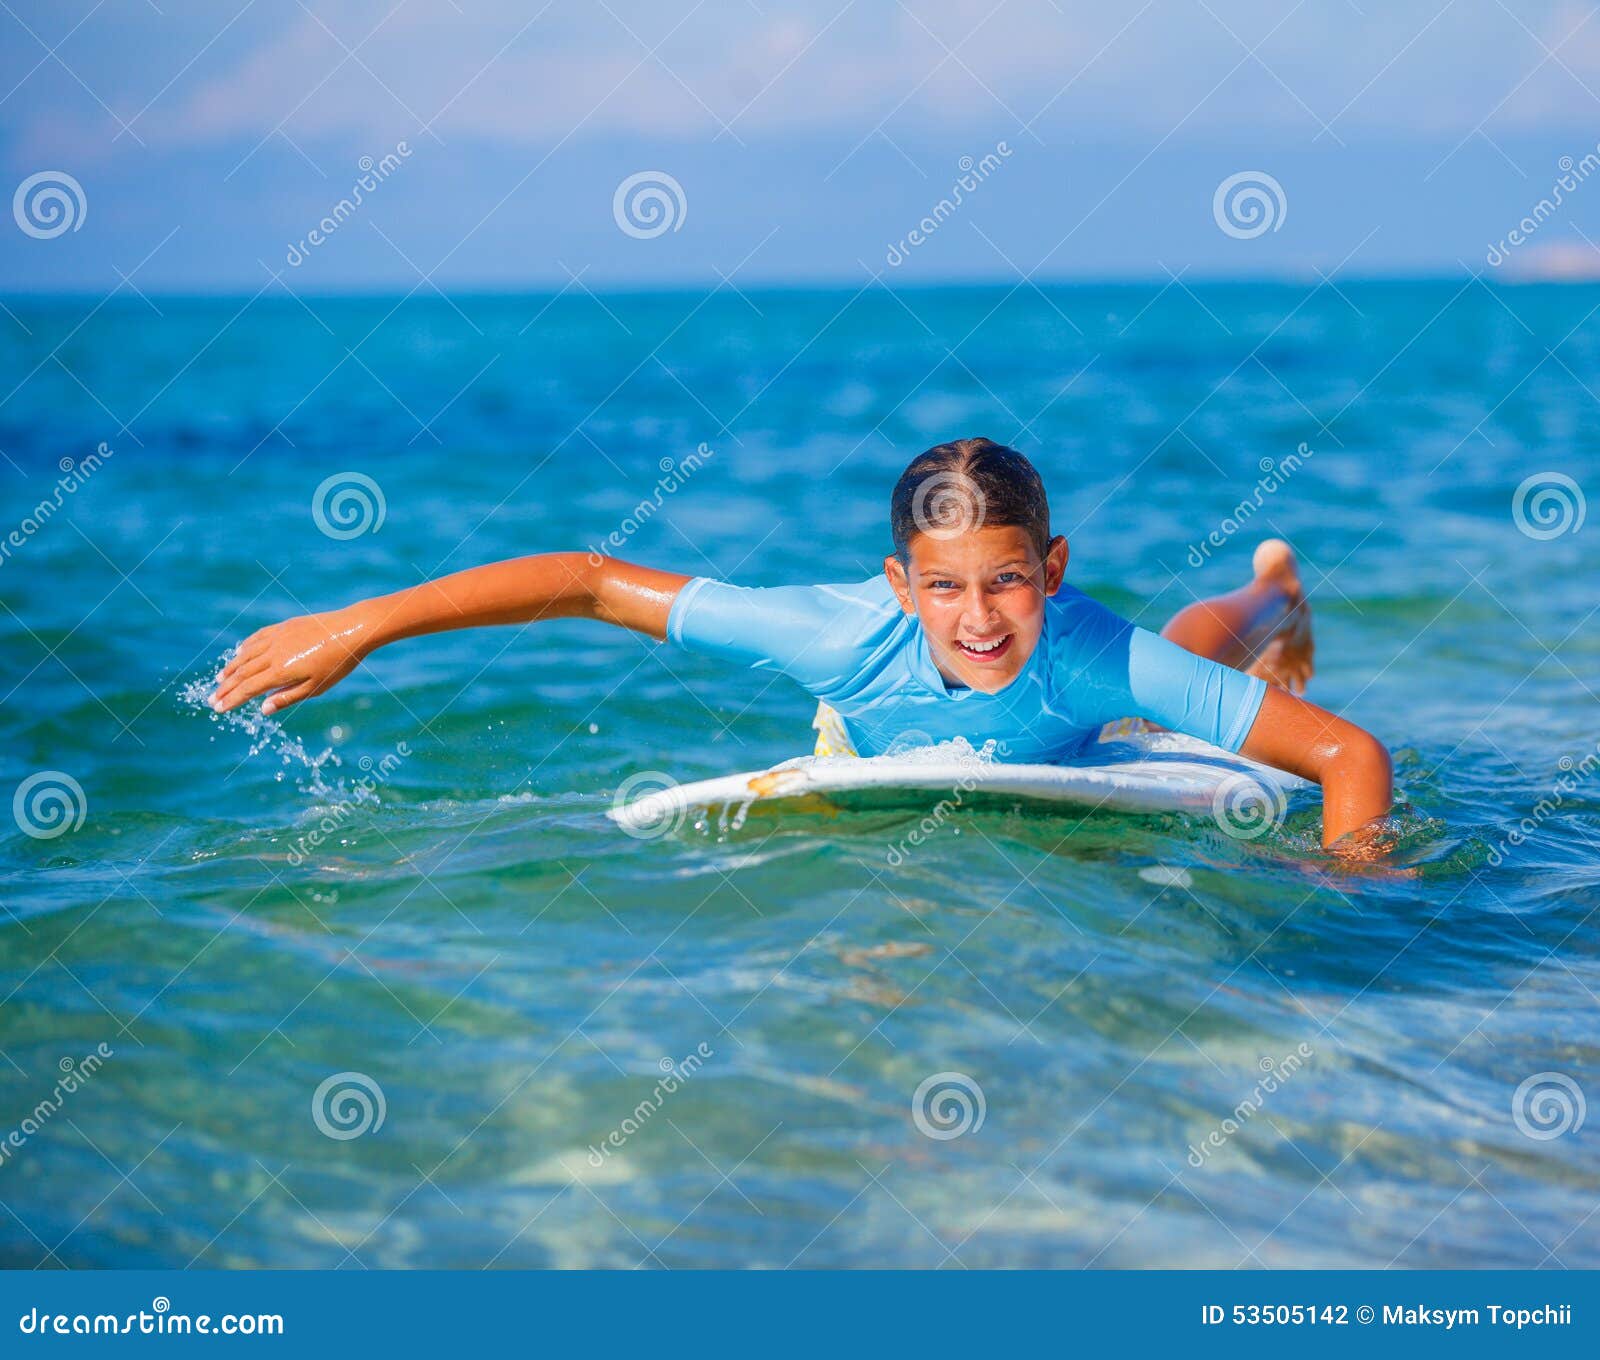 Girl with surf stock photo. Image of vacation, person - 53505142